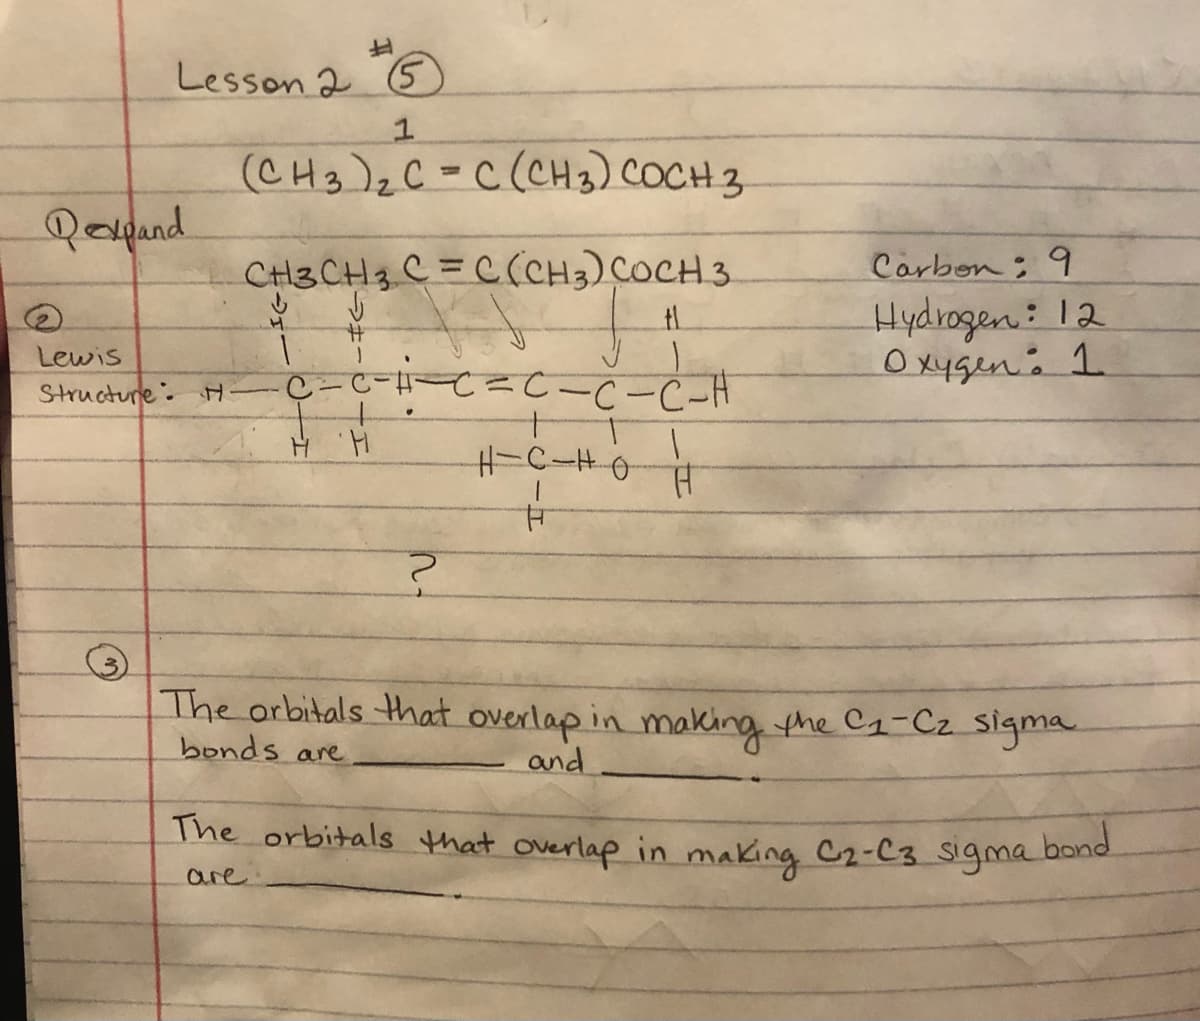 Lesson 2 5
(CH3)zC=C(CH3) COCH 3
Qoyand
CH3CH3 C = C(CH3) COCH 3
Carbon: 9
Hydrogen: 12
O xygen. 1
Lewis
Structure. H
ー-C-H
The orbitals that overlap in making the C1-Cz sigma.
bonds are
and
The orbitals that overlap in making C2-C3 sigma band
are
